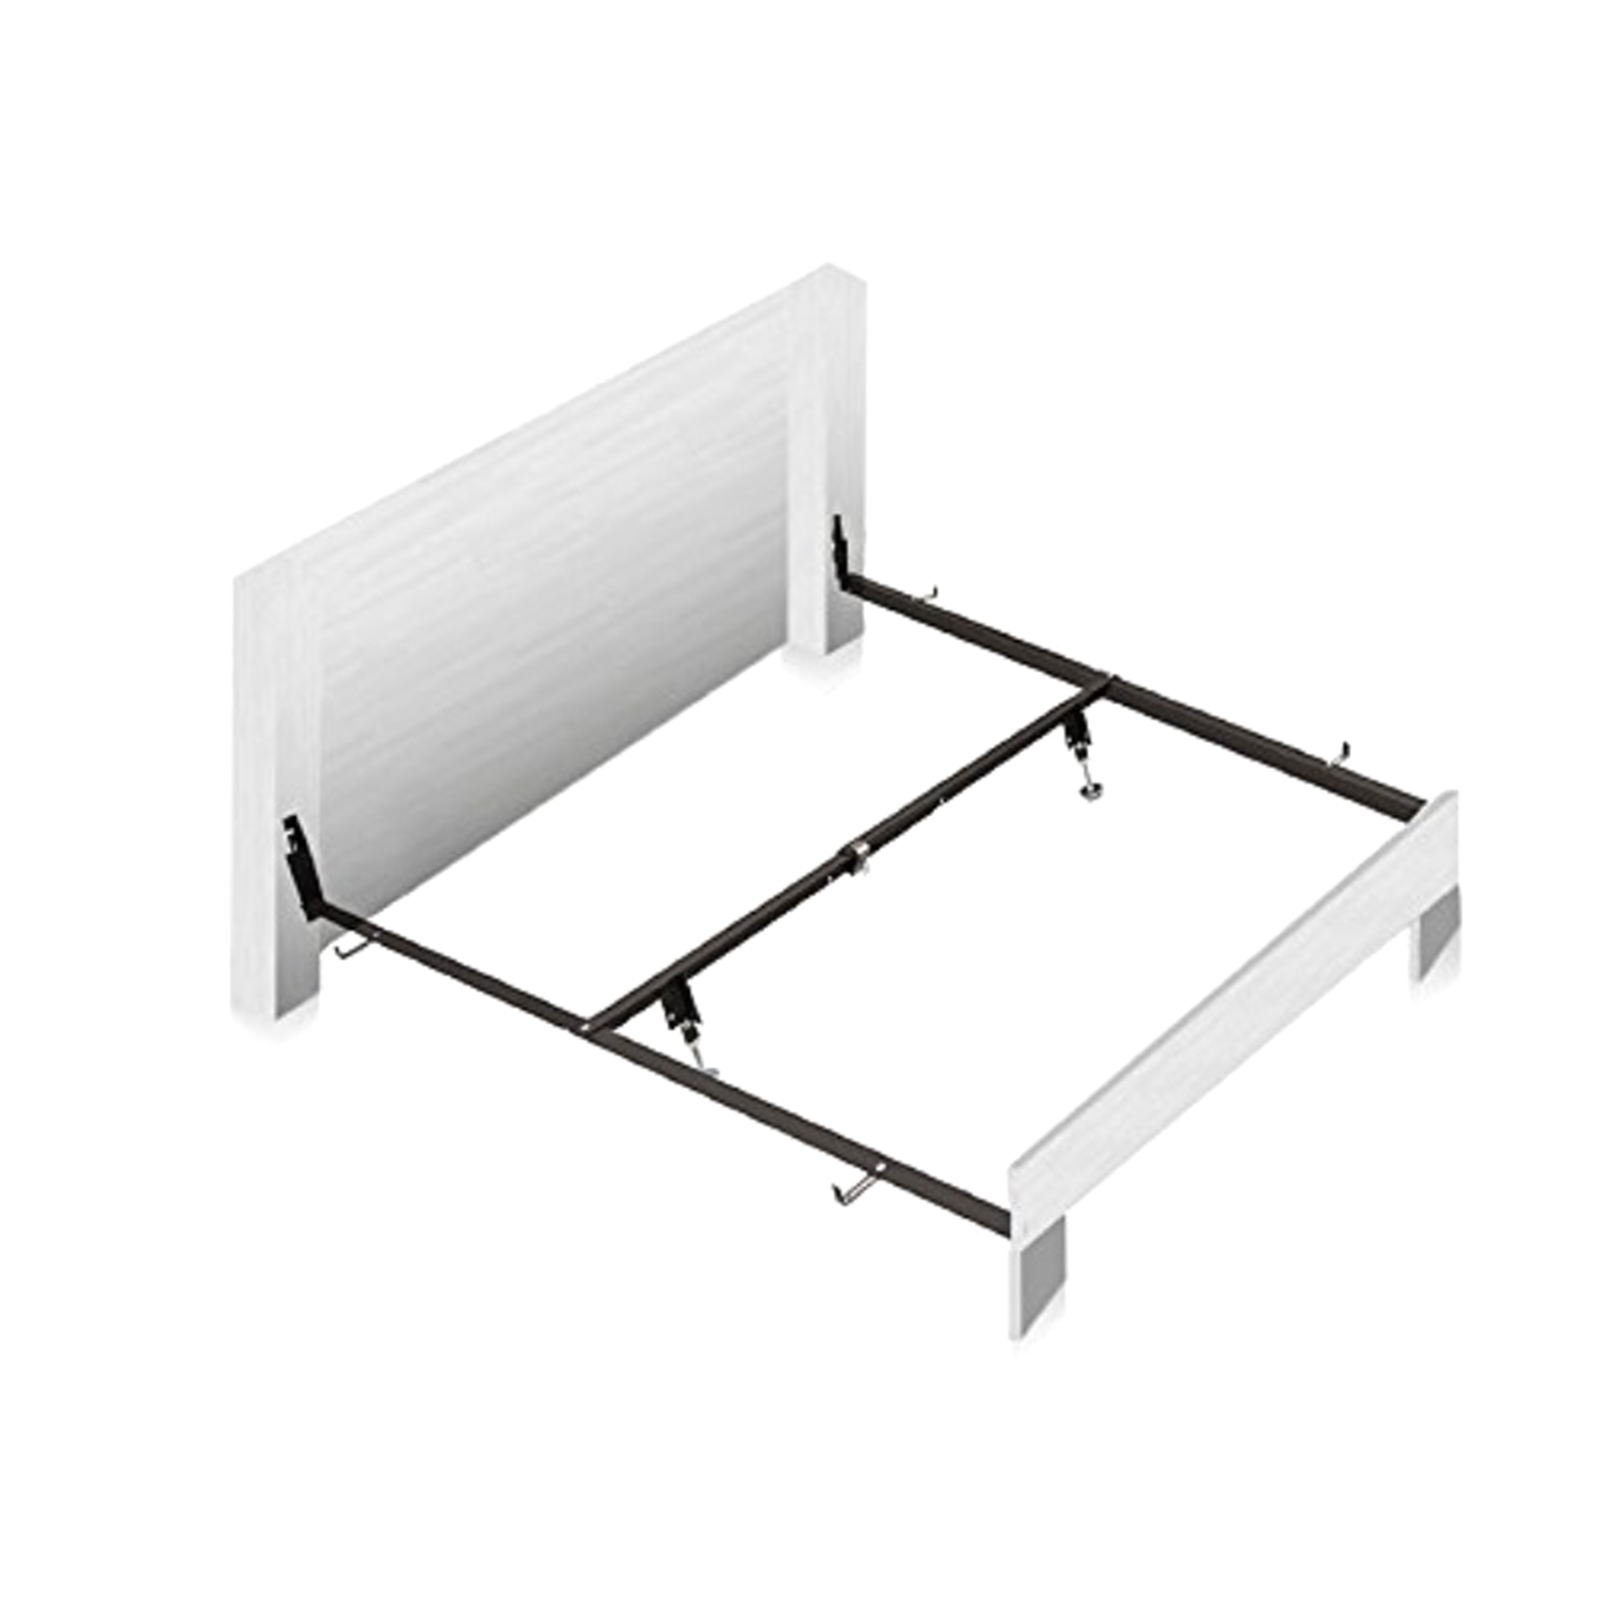 Hospitality Bed DRCV1L Steel Bed Rail System